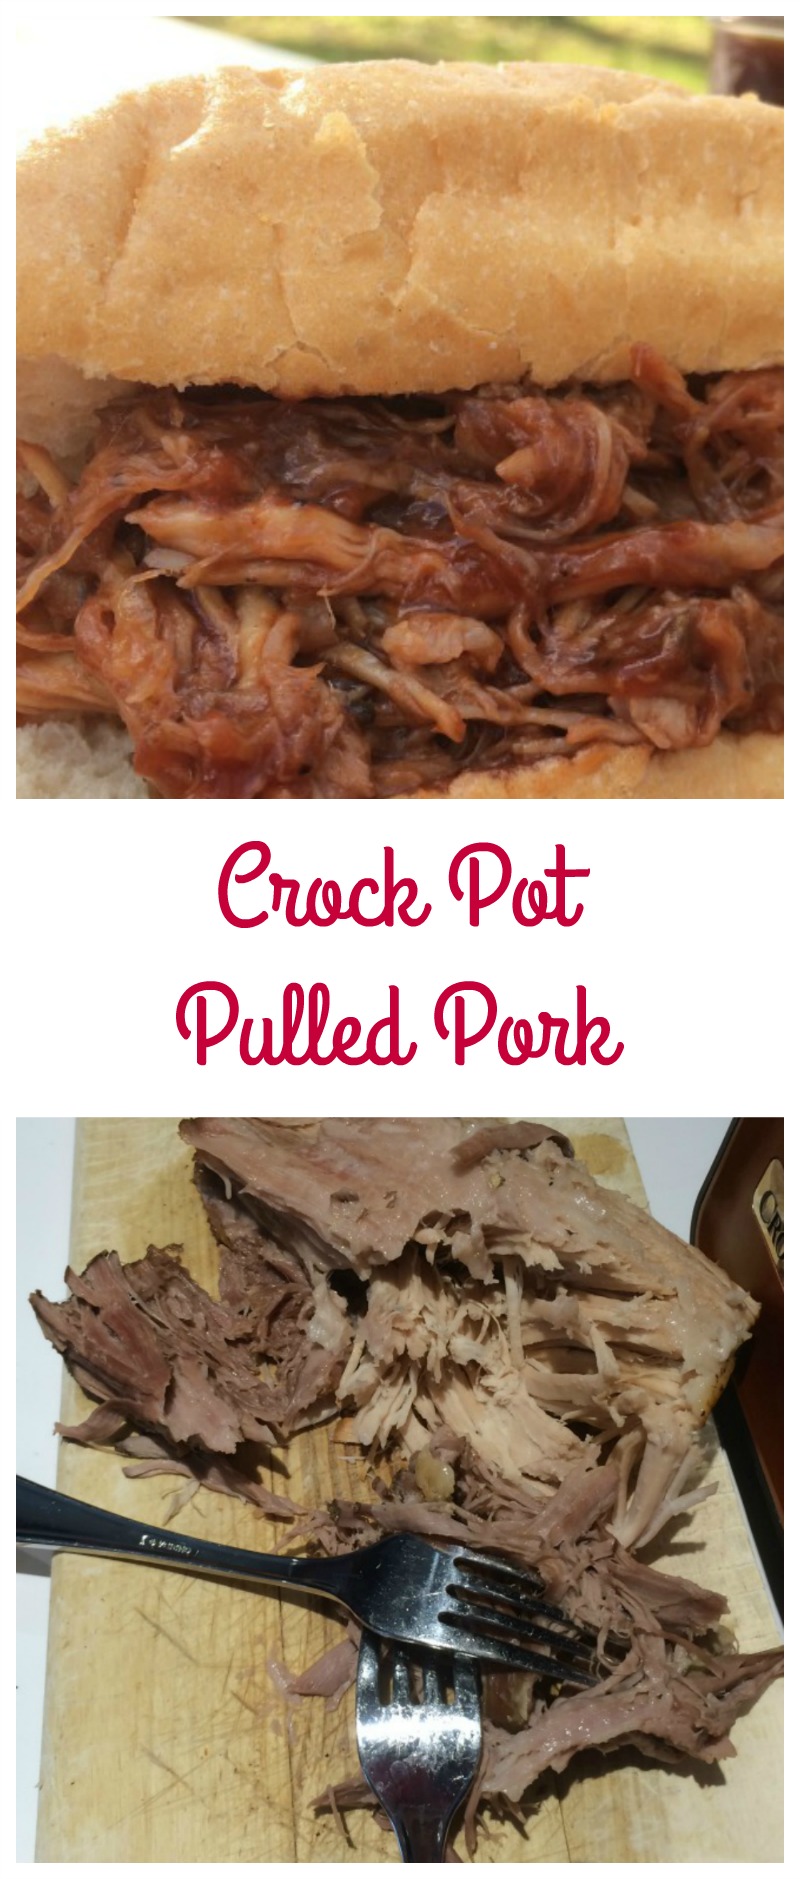 This Crock Pot Pulled Pork is a summertime favorite in our house! I love how we can have a yummy dinner without having to spend all day in a hot kitchen!